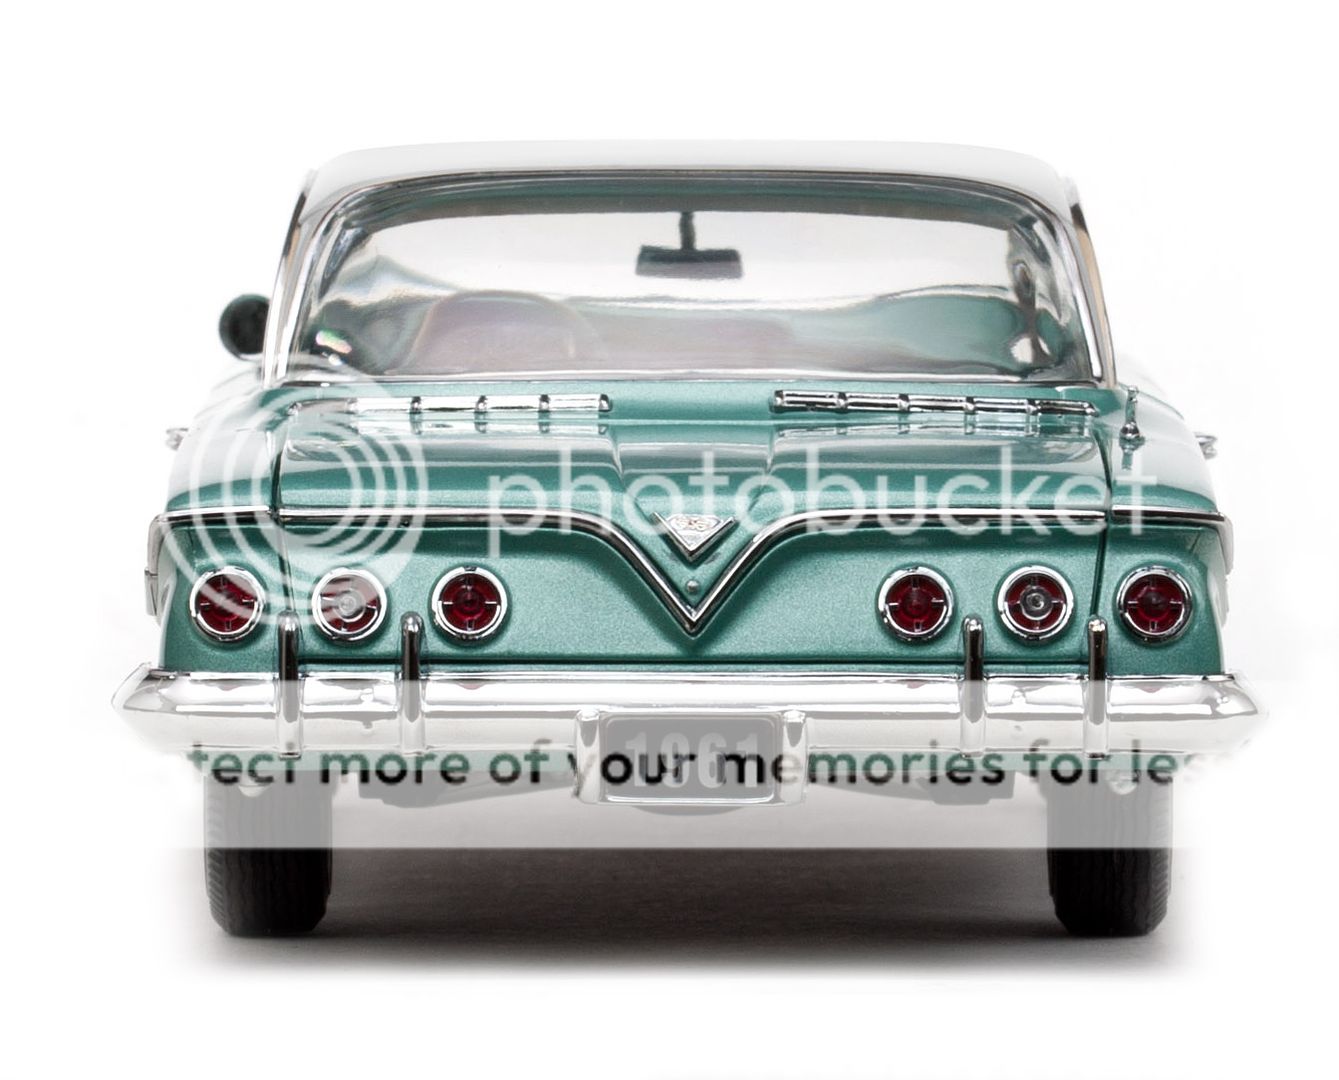 18 Sun Star 1961 Arbor Green Chevrolet Impala Sport Coupe with A 409